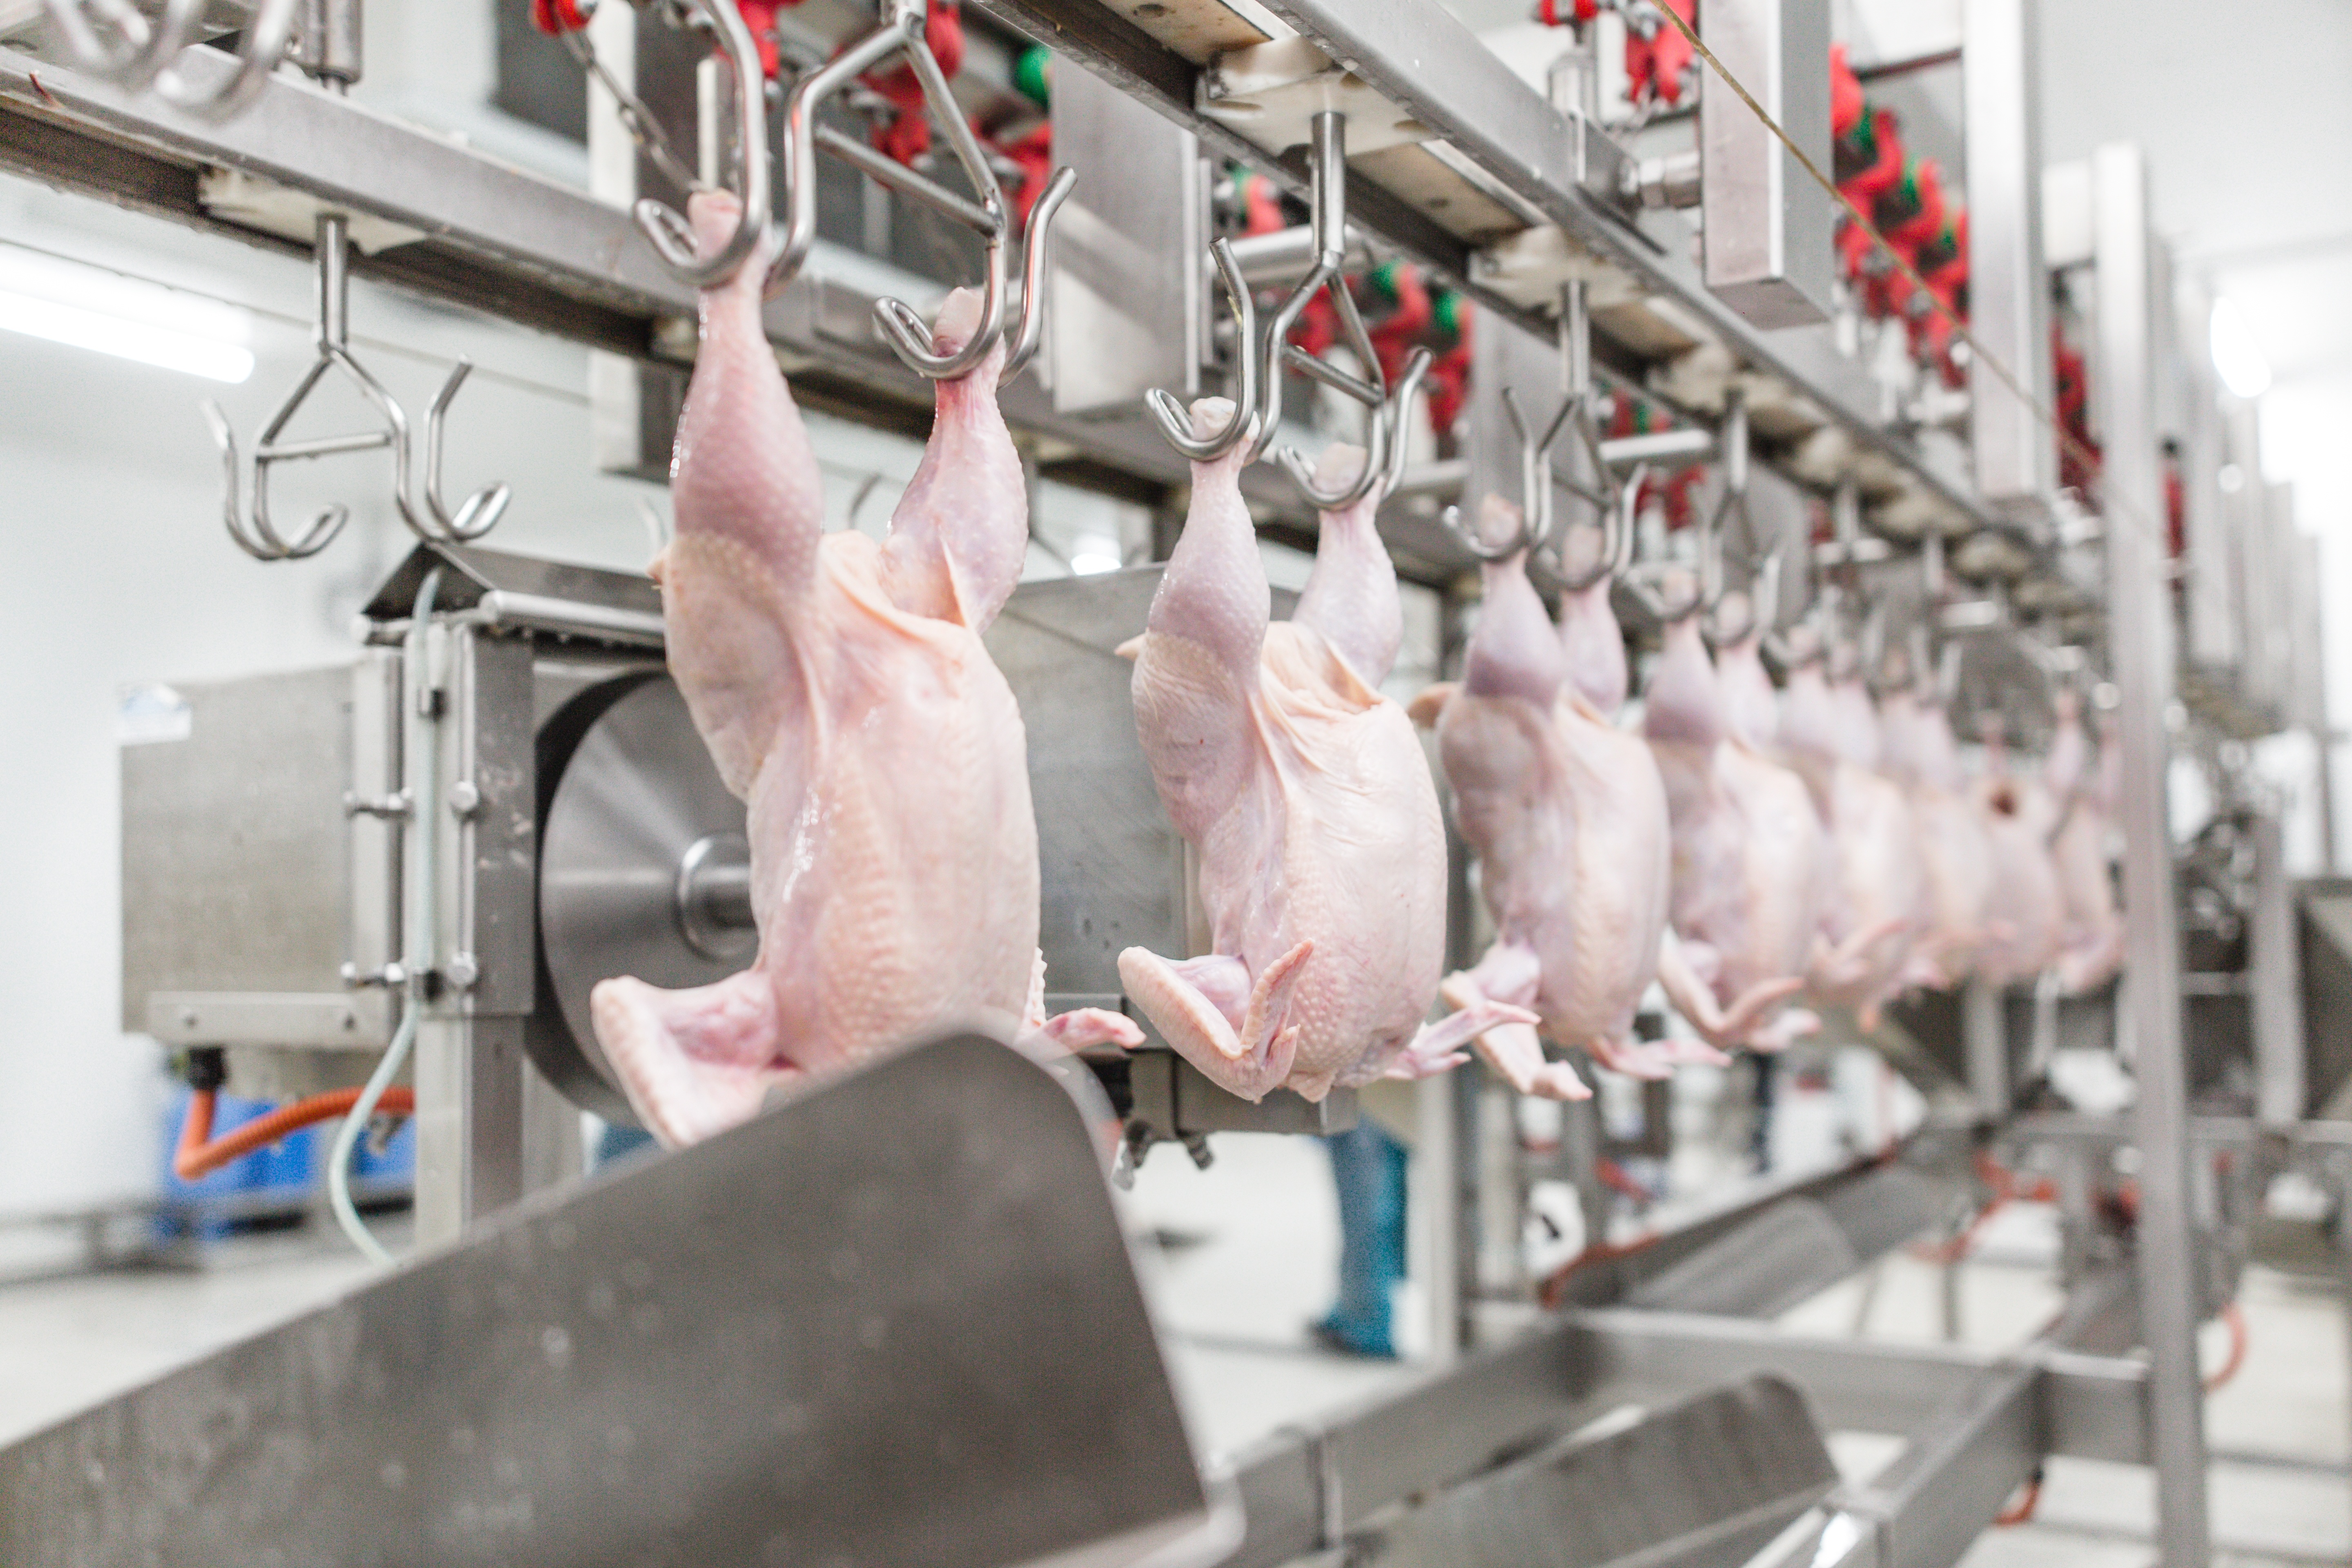 chicken carcasses hang from hooks on a production line